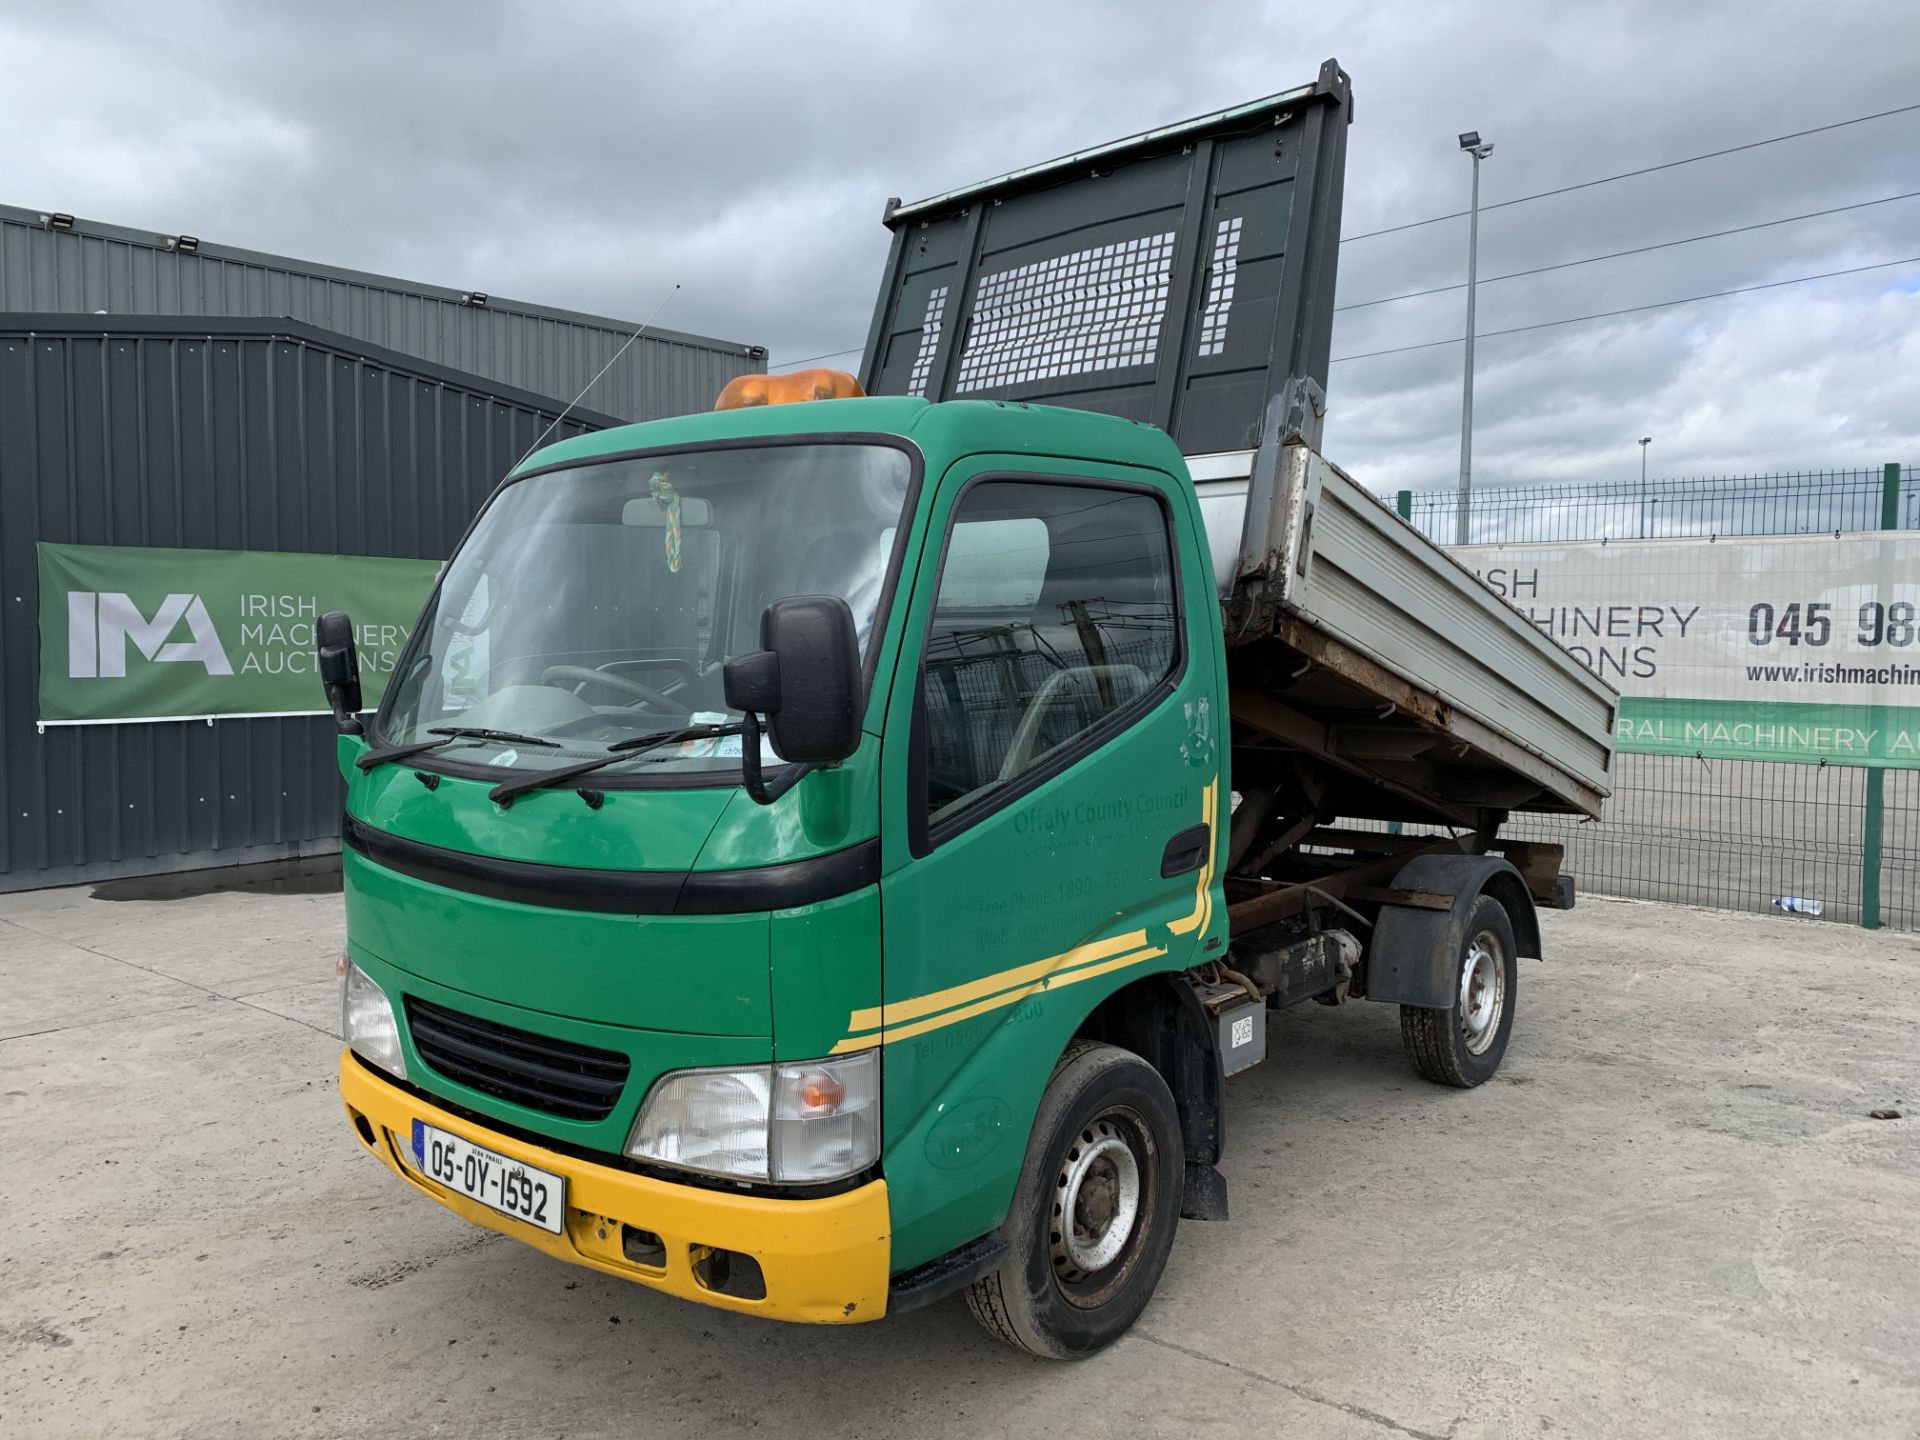 05OY1592 UNRESERVED 2005 Toyota Dyna 100SC 3.5T Dropside Tipper